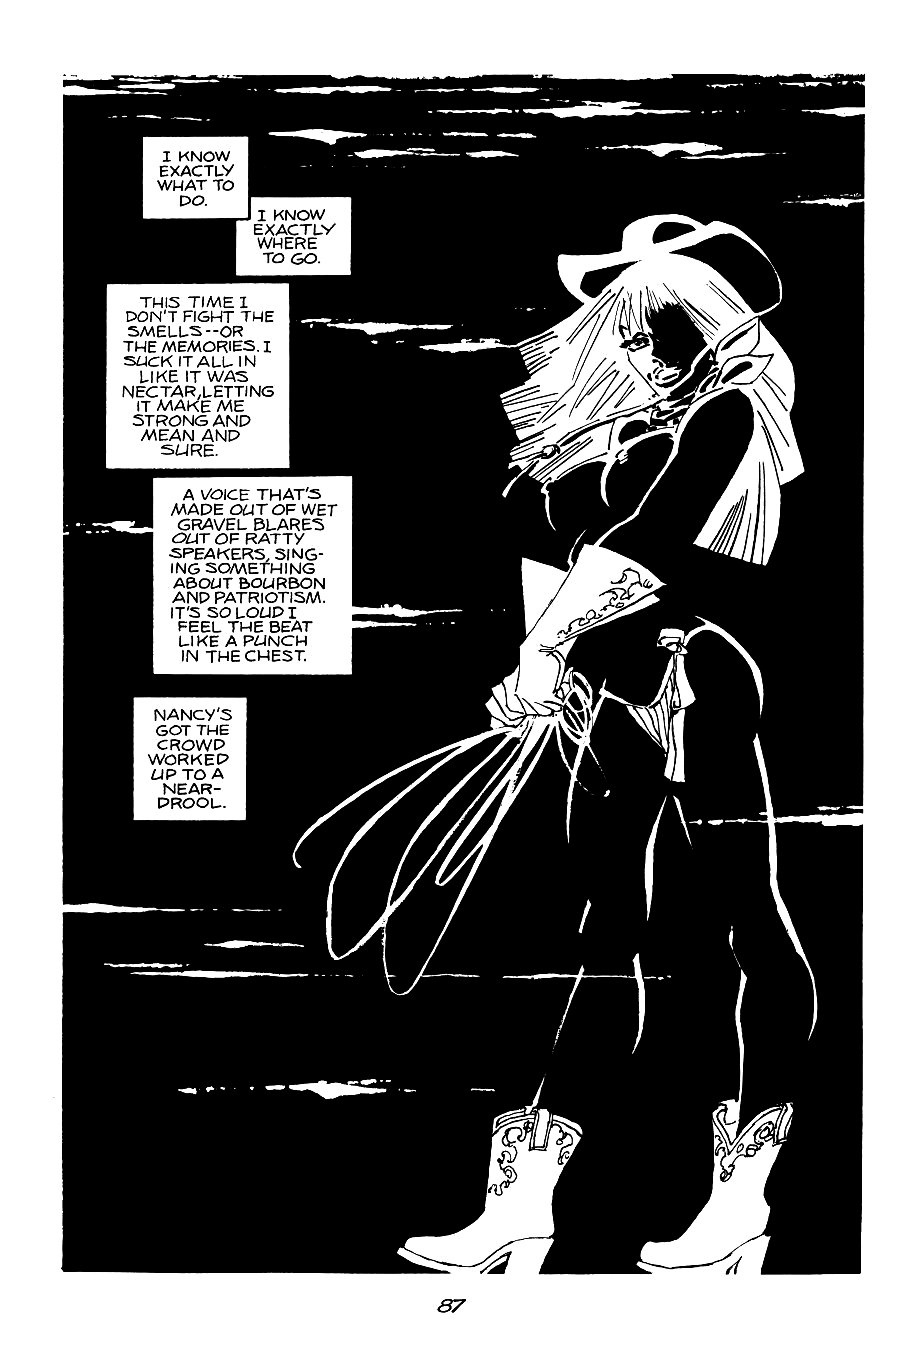 page 87 of sin city 2 the hard goodbye